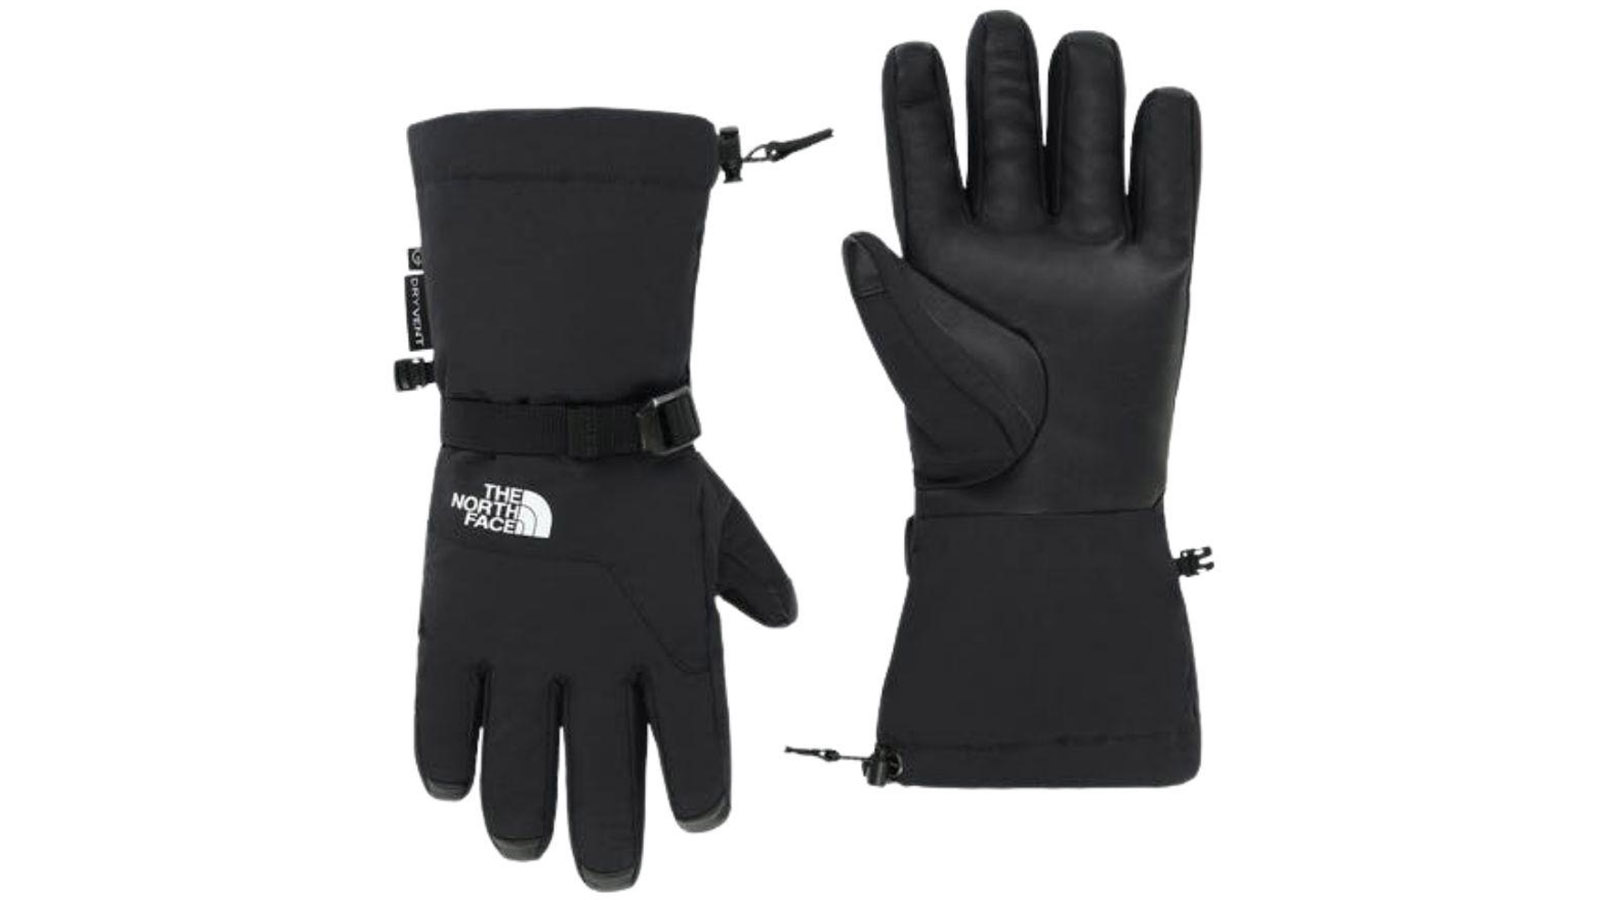 North Face Revelstoke Etip Gloves - Waterproof and Best for Cold Weather